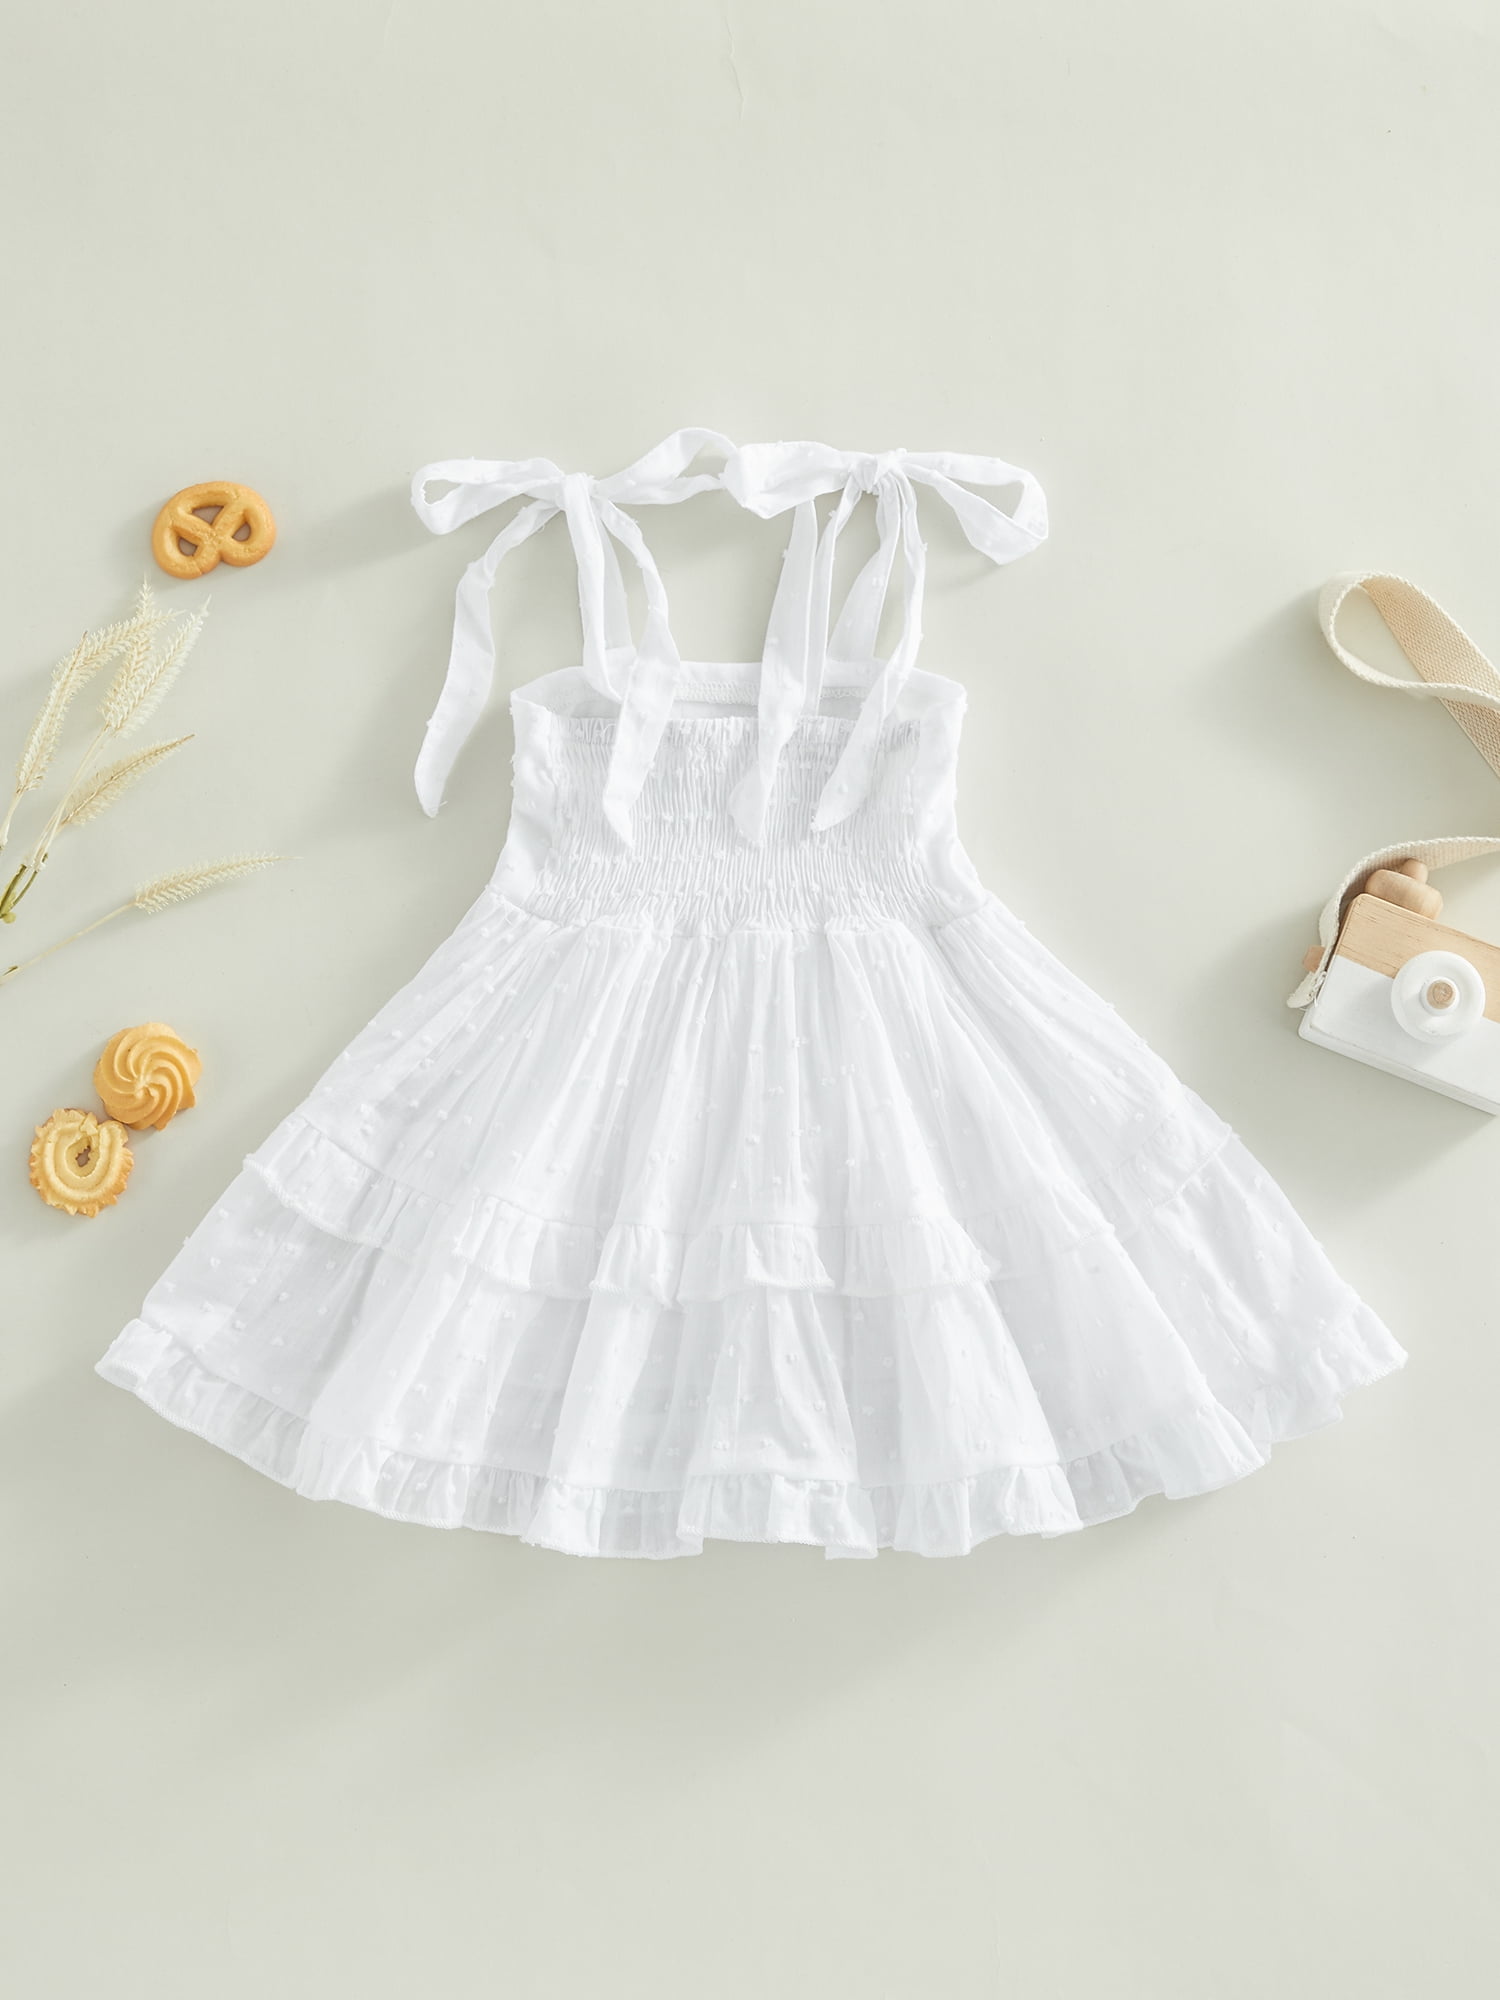 Premium Vector  Cute boho dress with sandals, purse and panties for baby.  white background, isolate